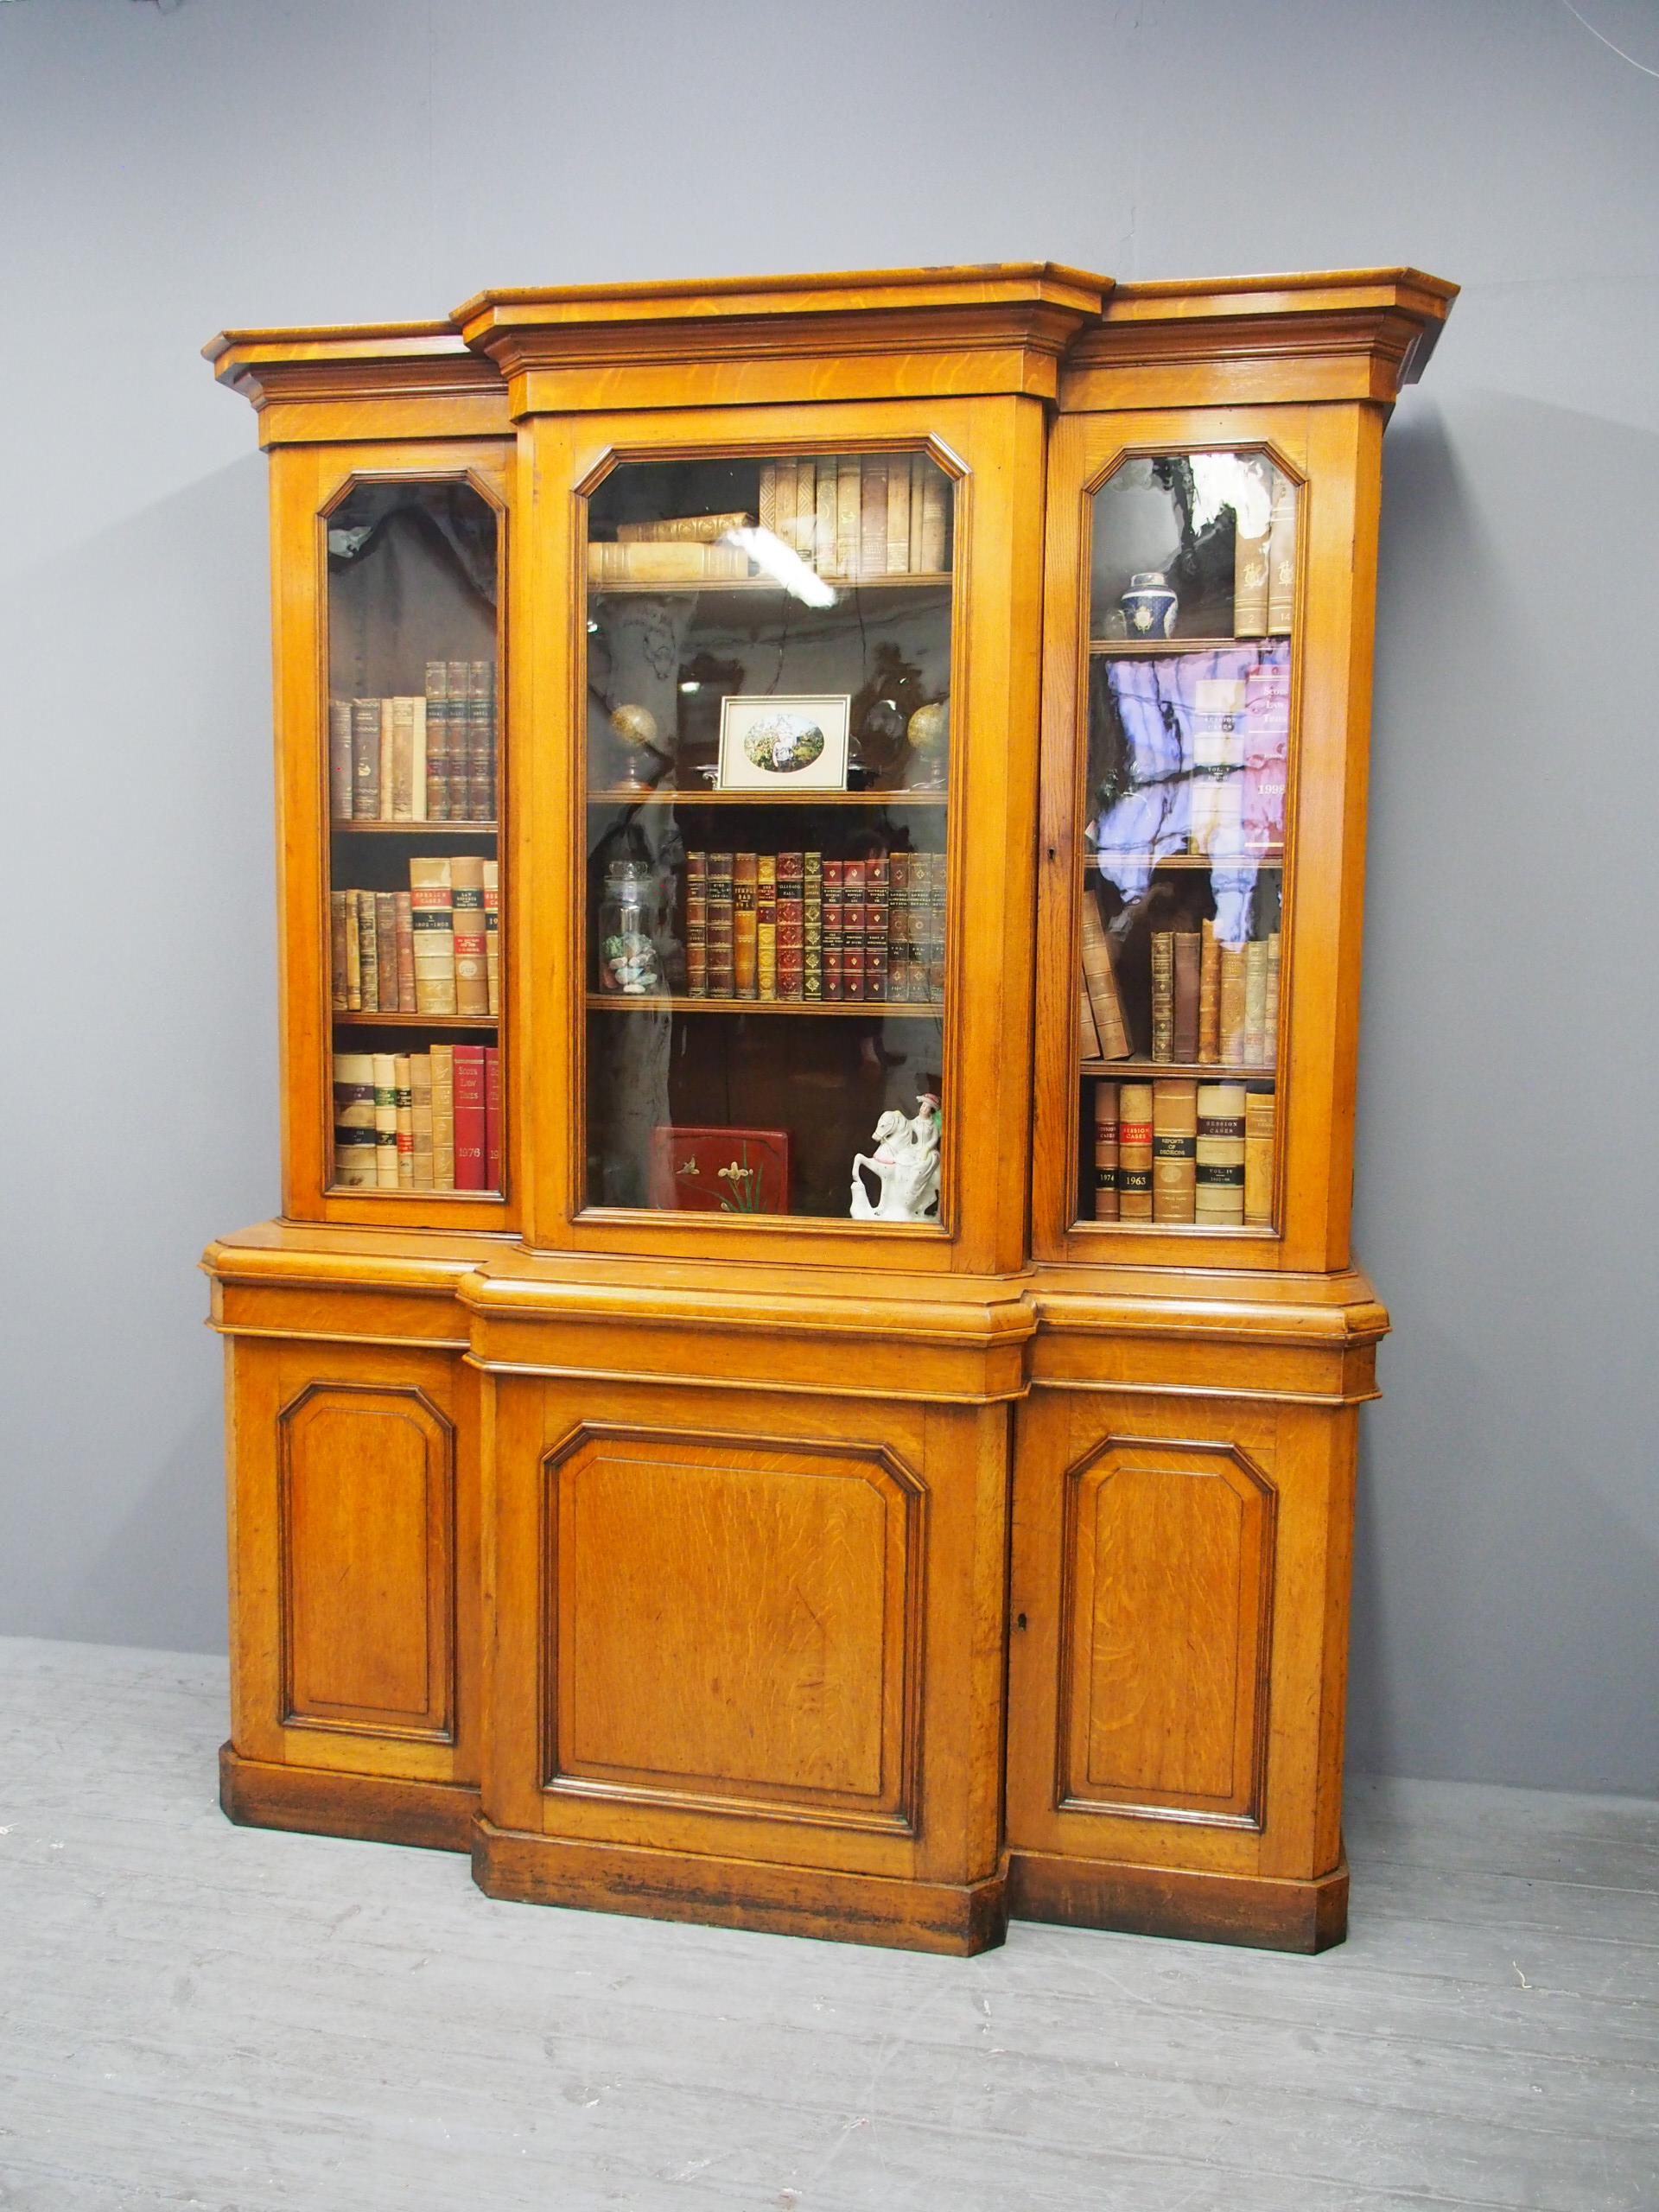 Mid-Victorian 3-door breakfront bookcase in figured quarter-cut, golden oak. The molded cornice is over a figured oak frieze and 3 glazed doors with chamfered sides, opening to interiors with oak-faced adjustable shelves. The conforming base has a